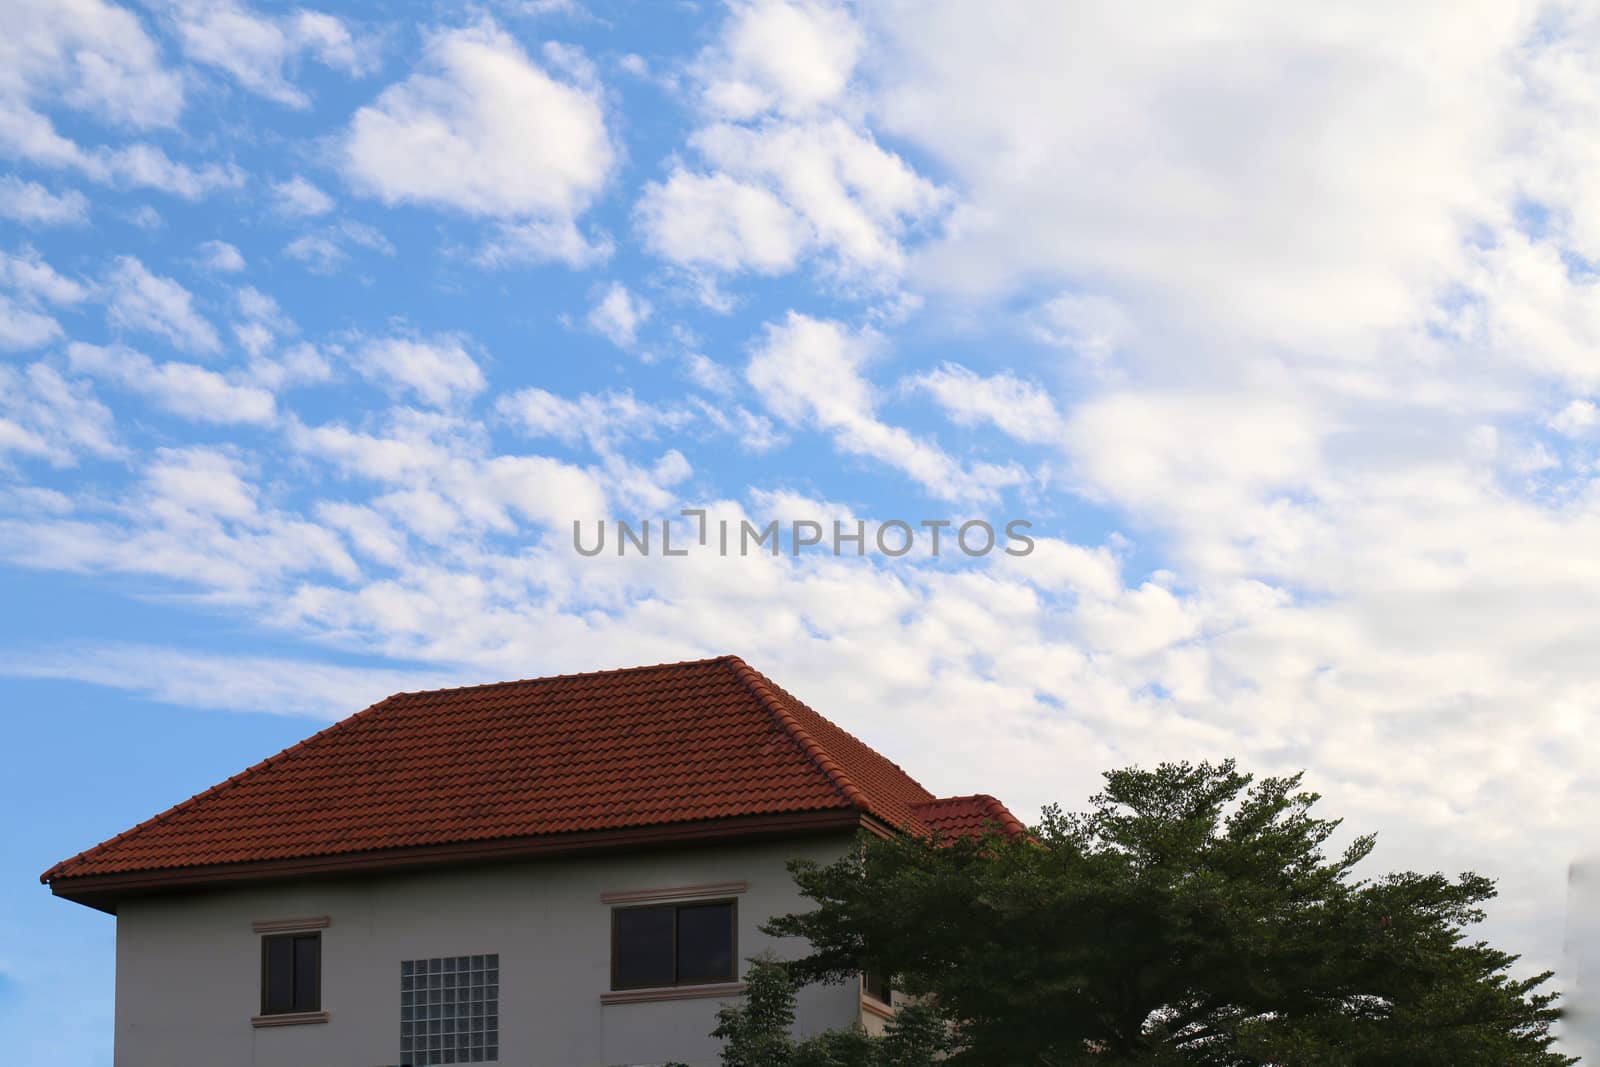 Background sky with houses on the bottom of the image picture big, home roof and tree, landscape property village on blue sky by cgdeaw